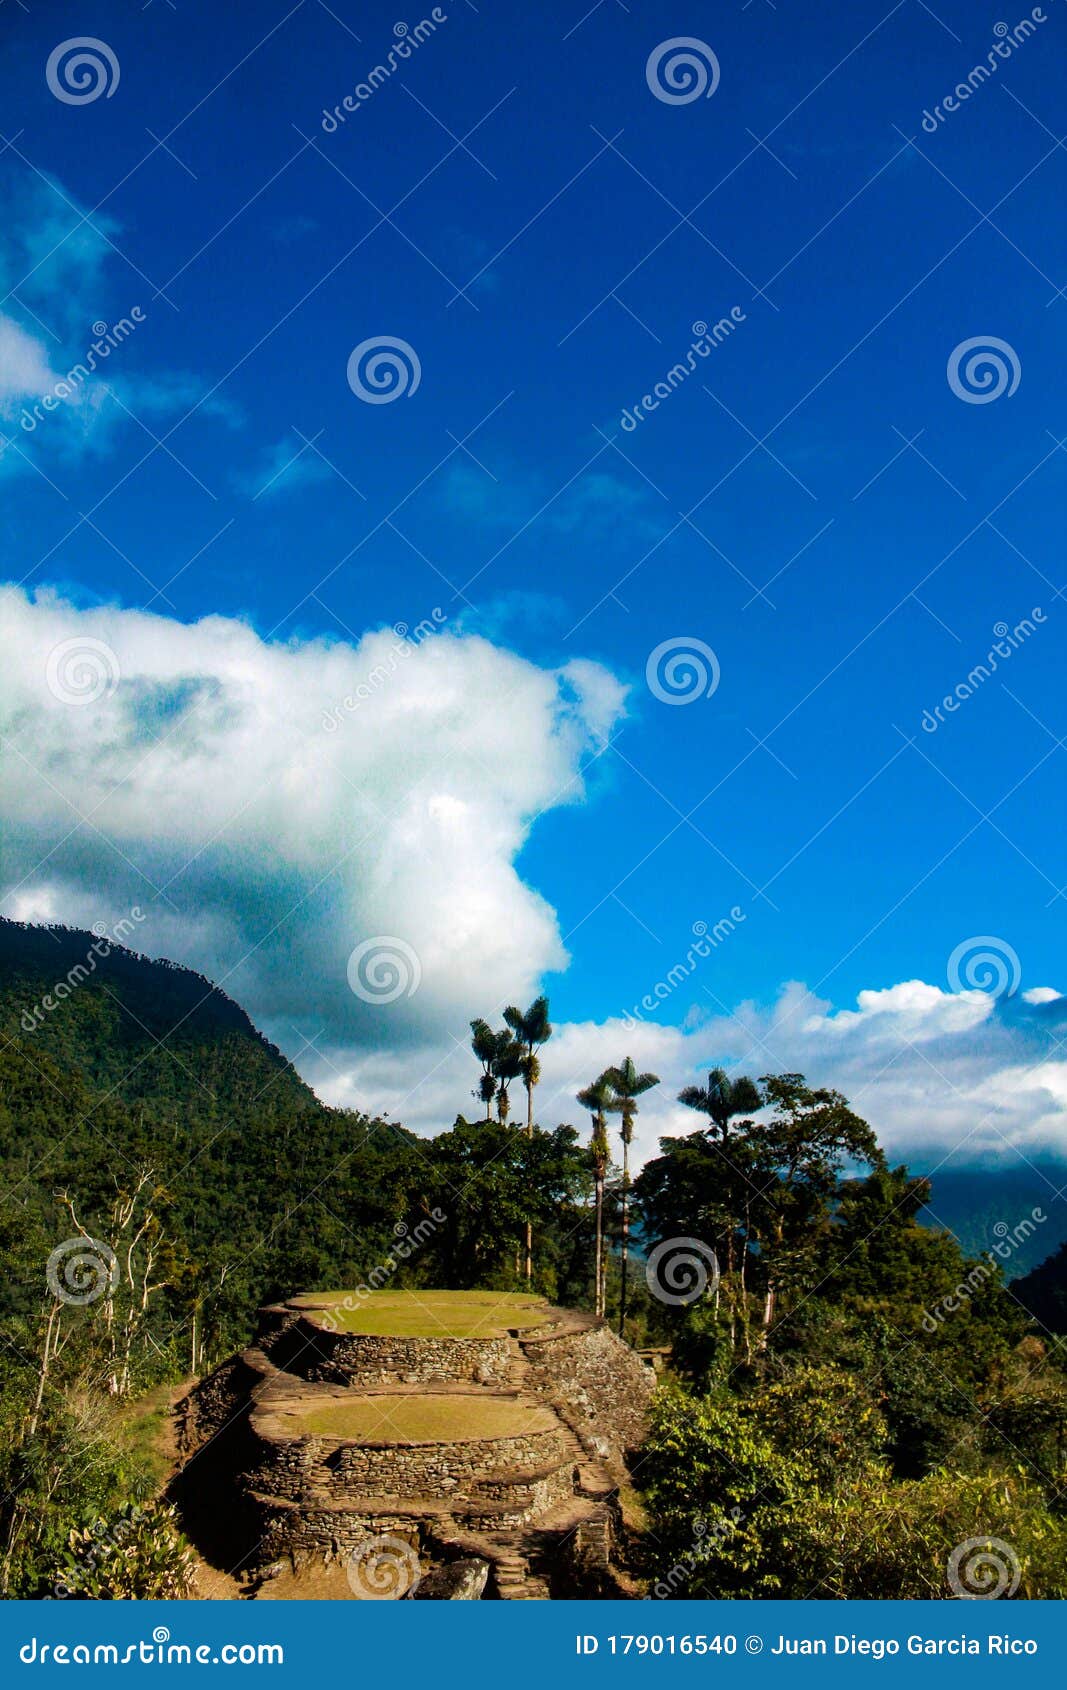 main terraces of lost city with blue sky indigenous name teyuna